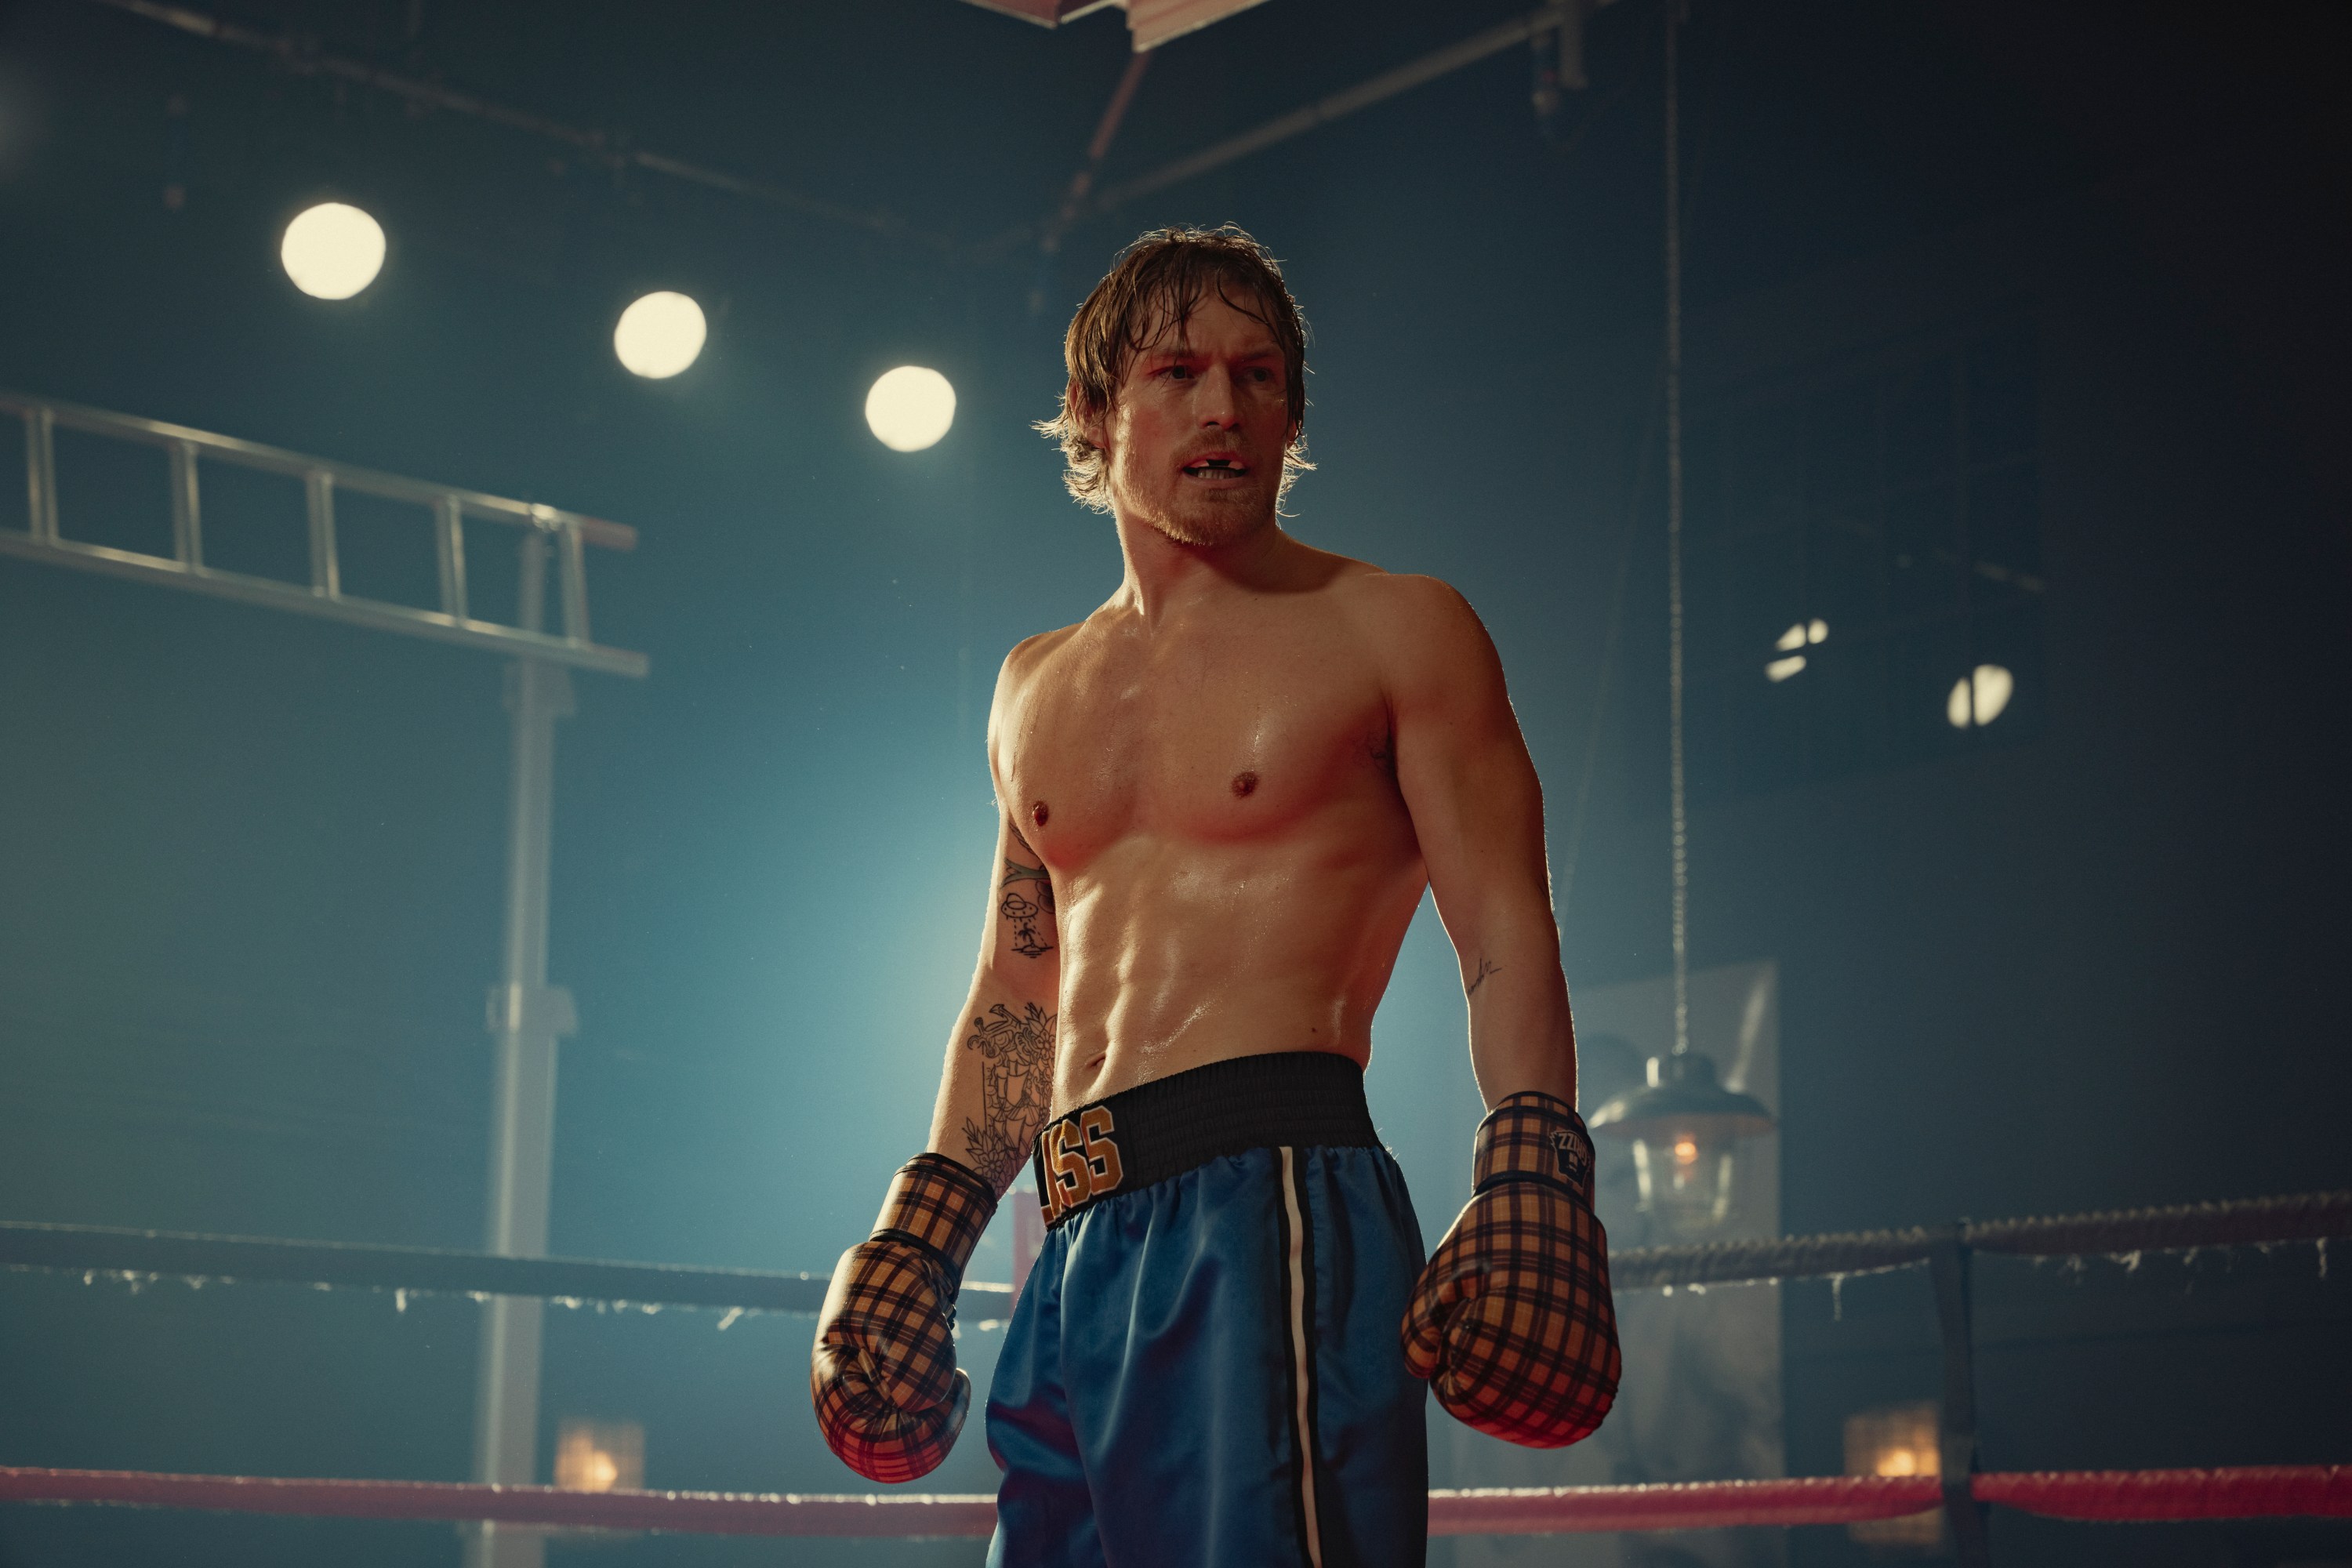 A sweaty and shirtless boxer stands in the ring alone in The Gentlemen on Netflix